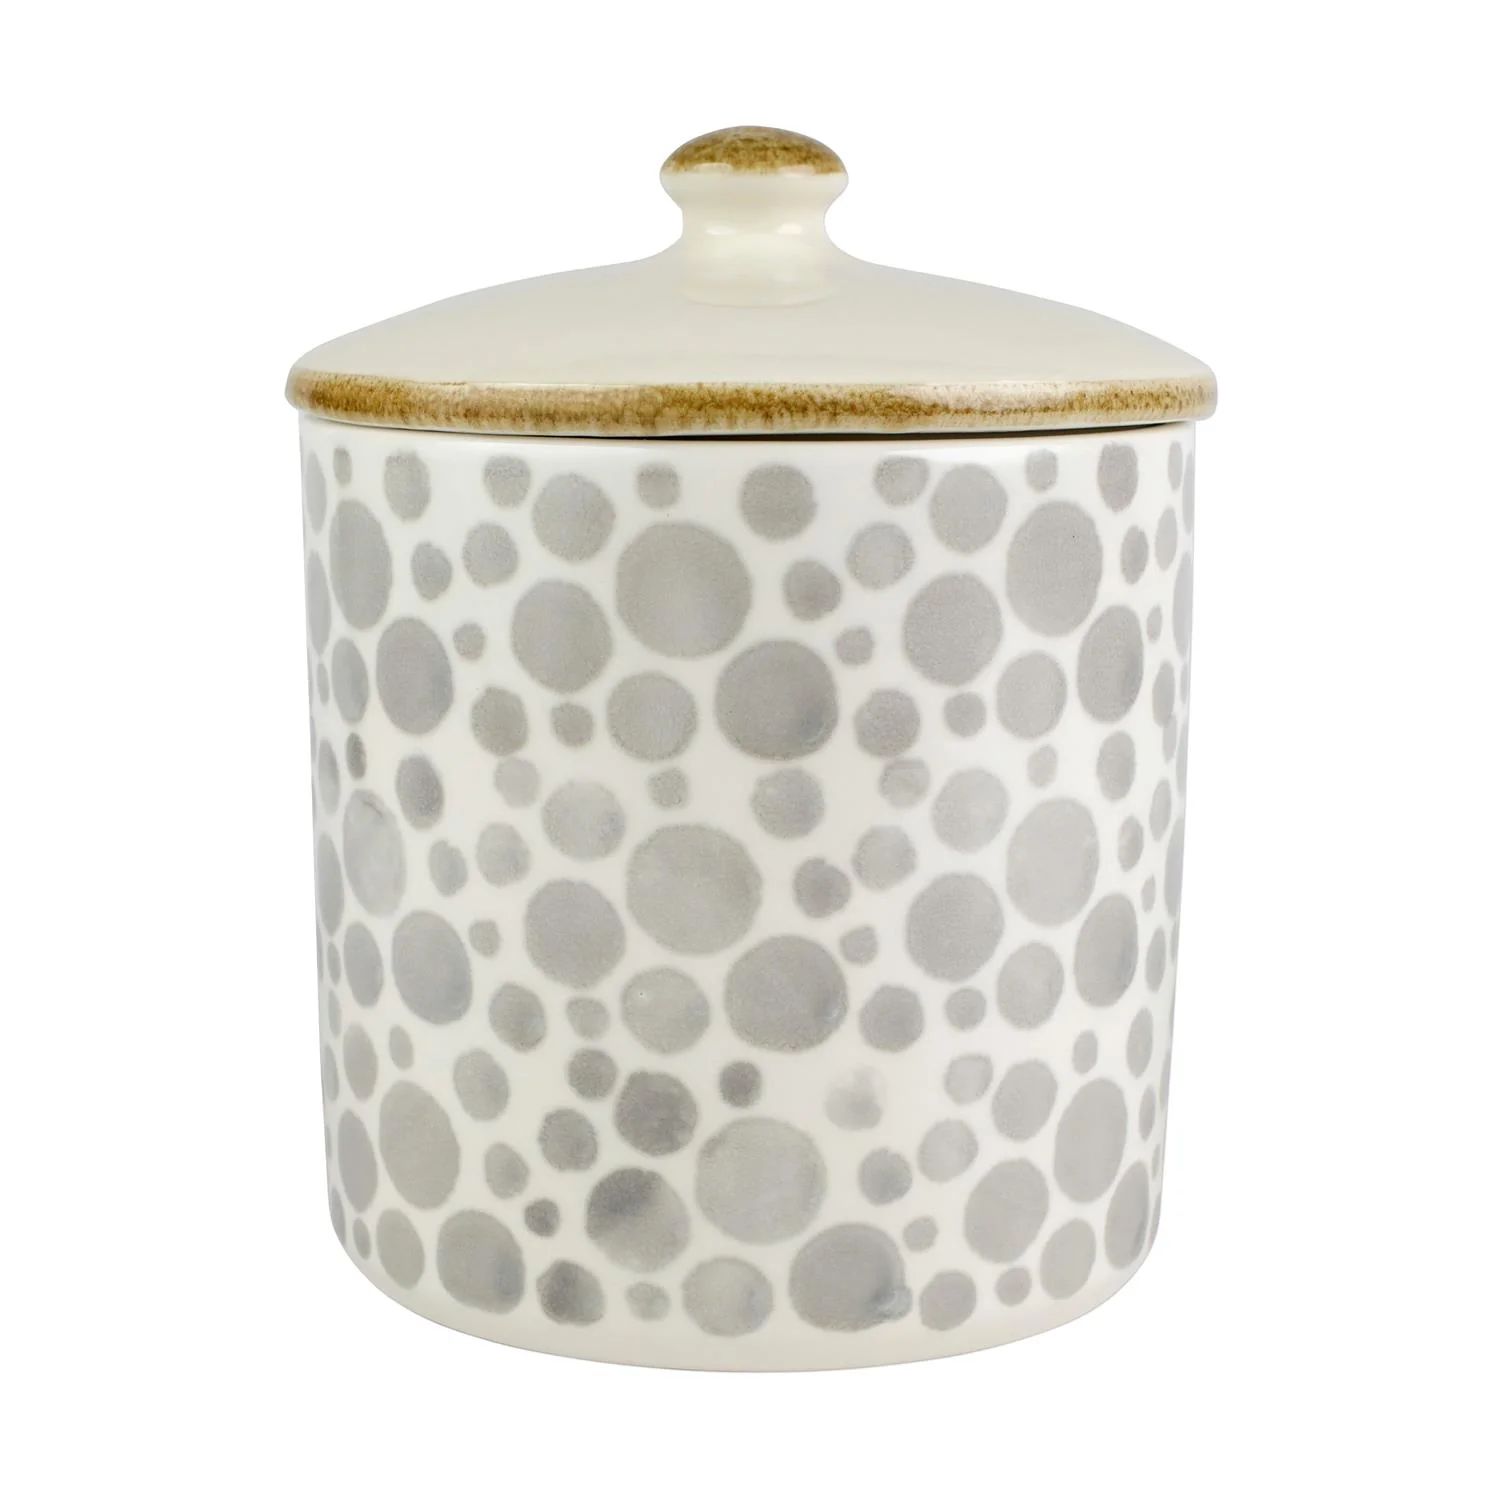 Viva by Vietri Earth Bubble Large Canister in Beige/Cream White 7.5 Lord & Taylor | Lord & Taylor